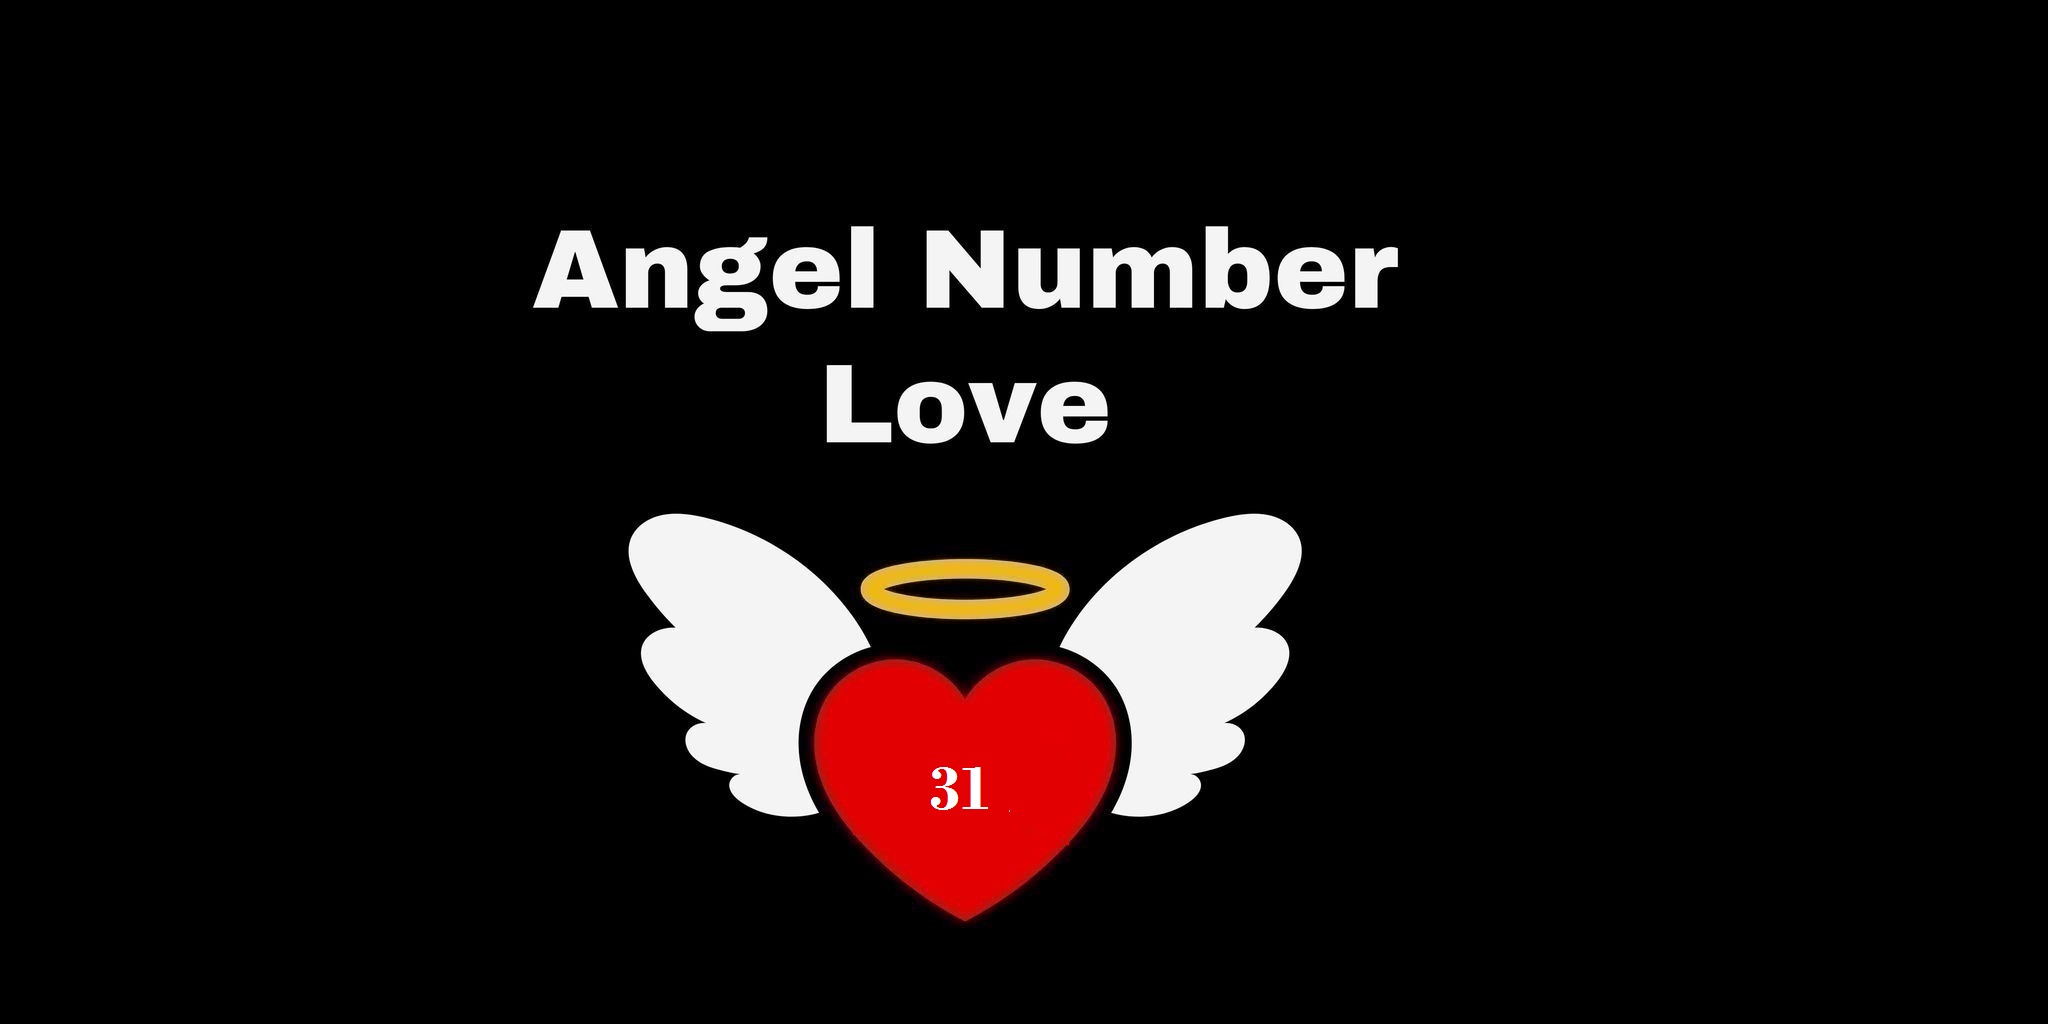 31 Angel Number Meaning In Love